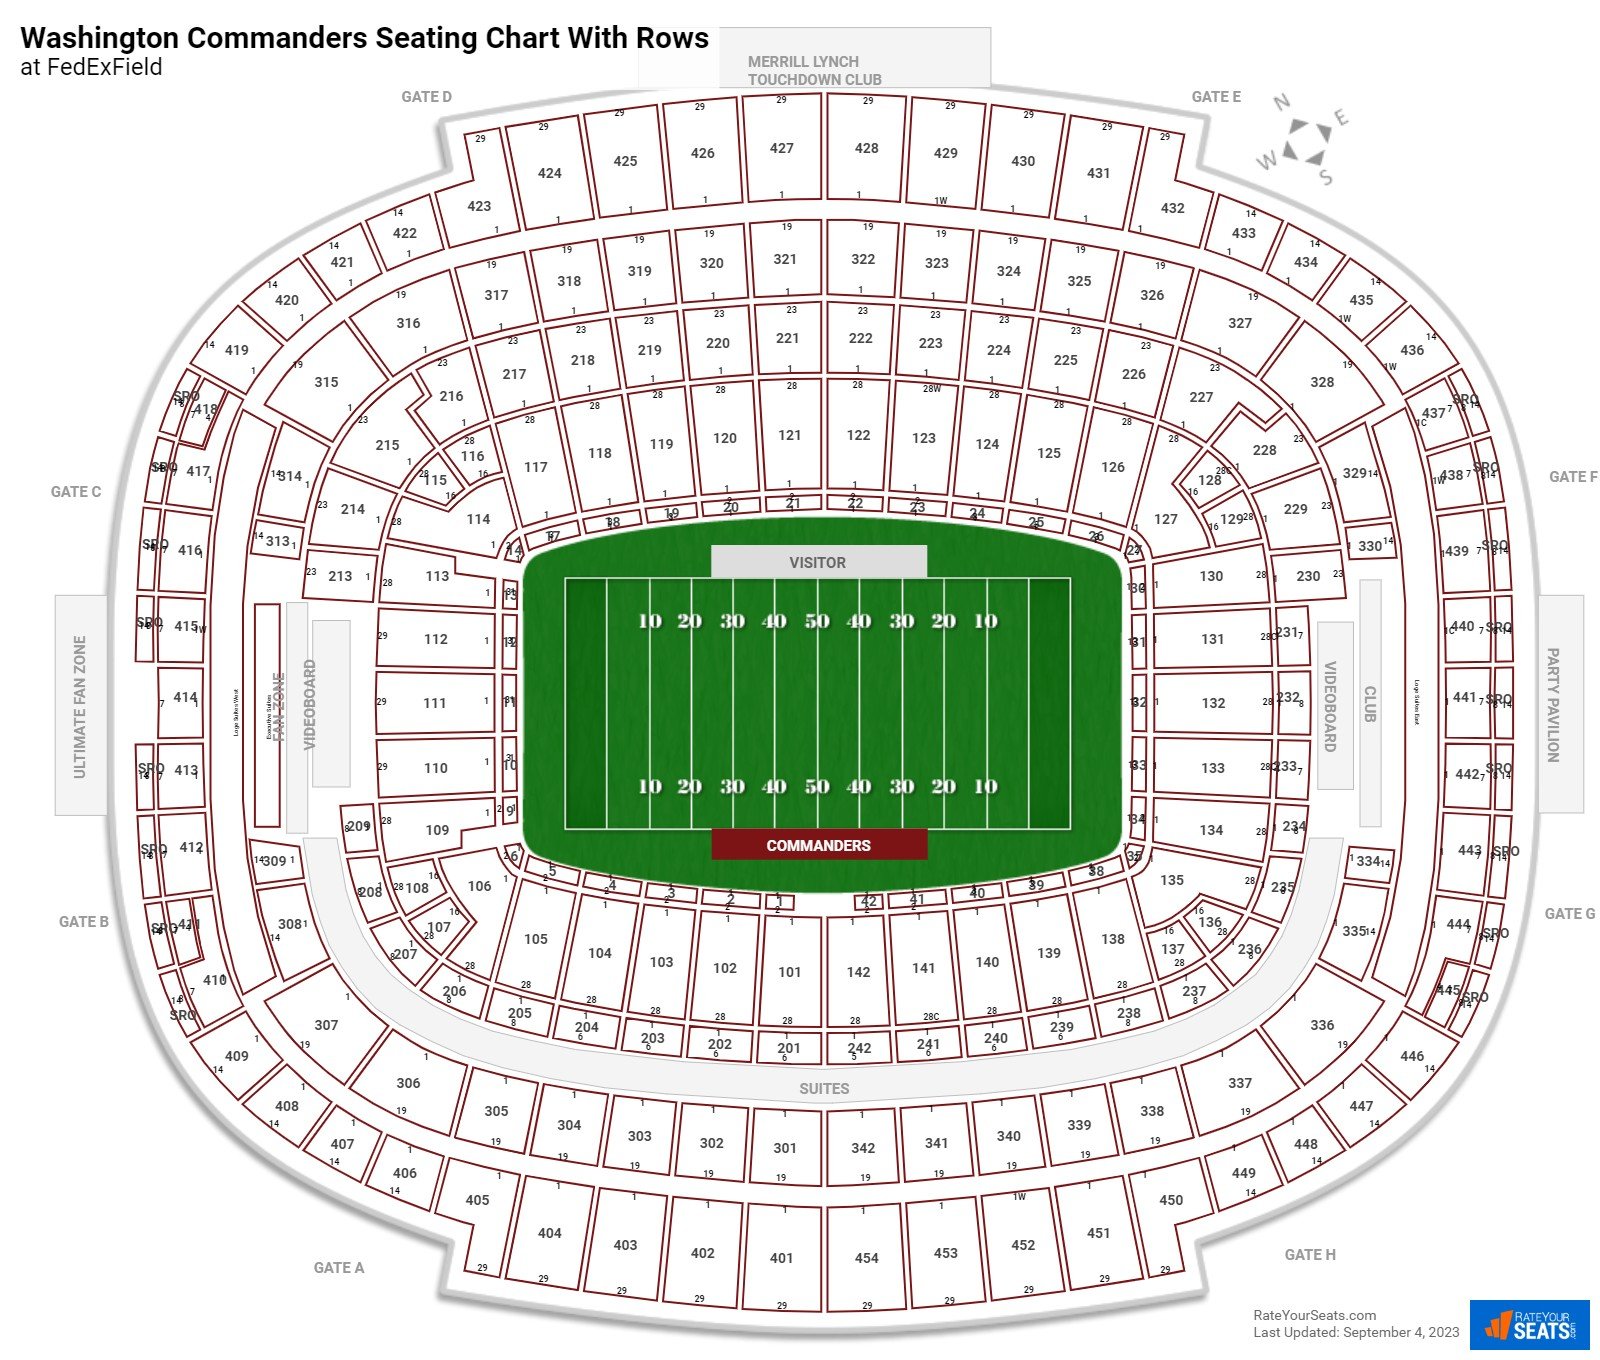 FedExField seating chart with row numbers